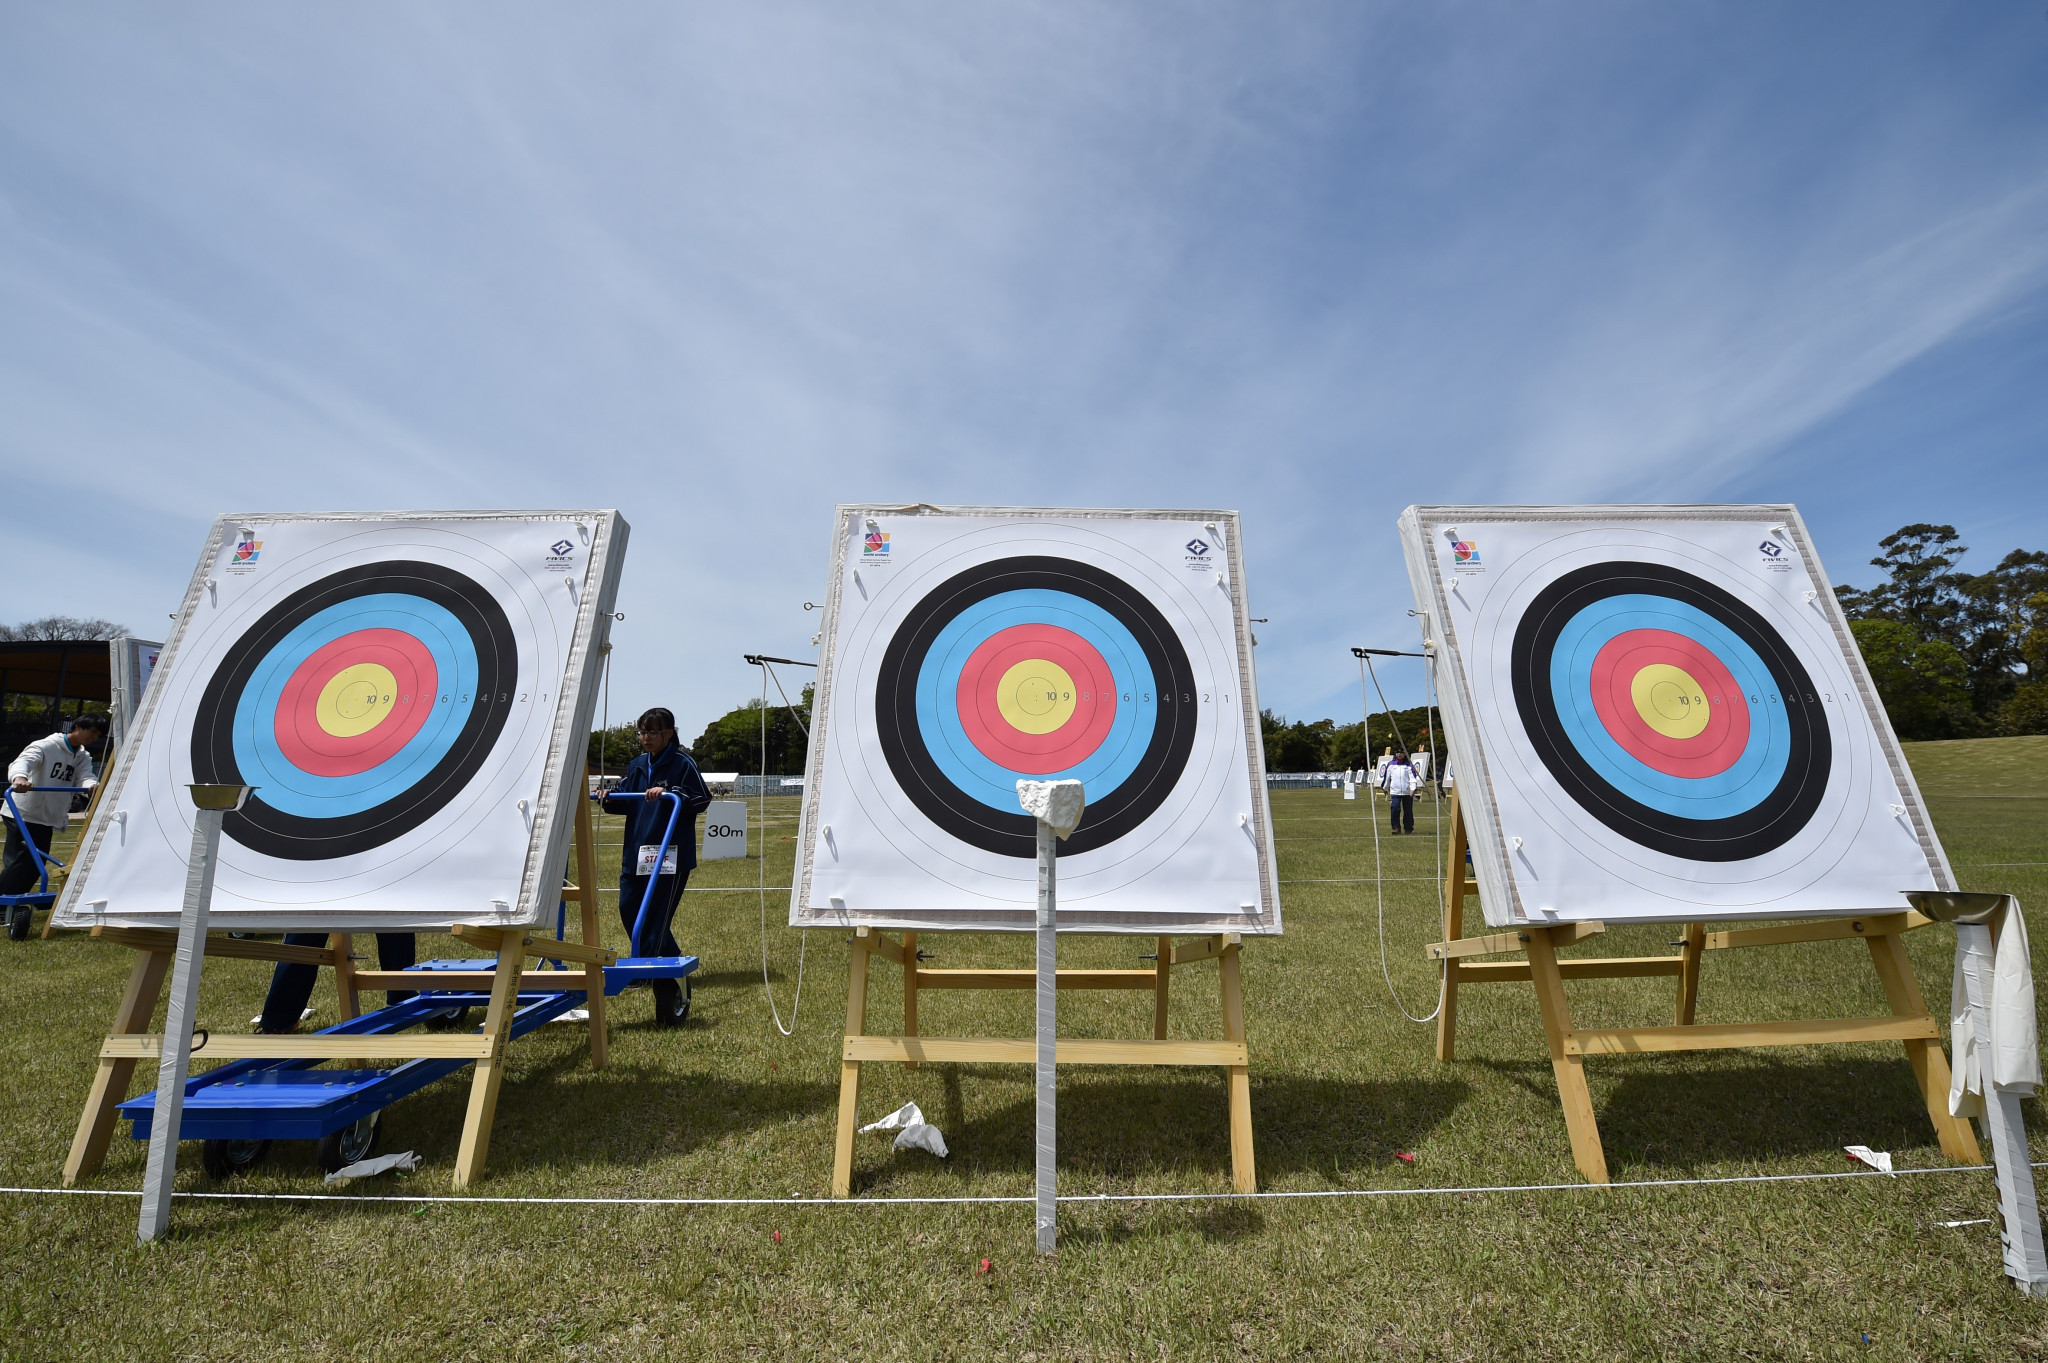 This week's Para-archery world ranking event in Nove Mesto is doubling up as the final qualifier for the Tokyo 2020 Paralympics ©Getty Images